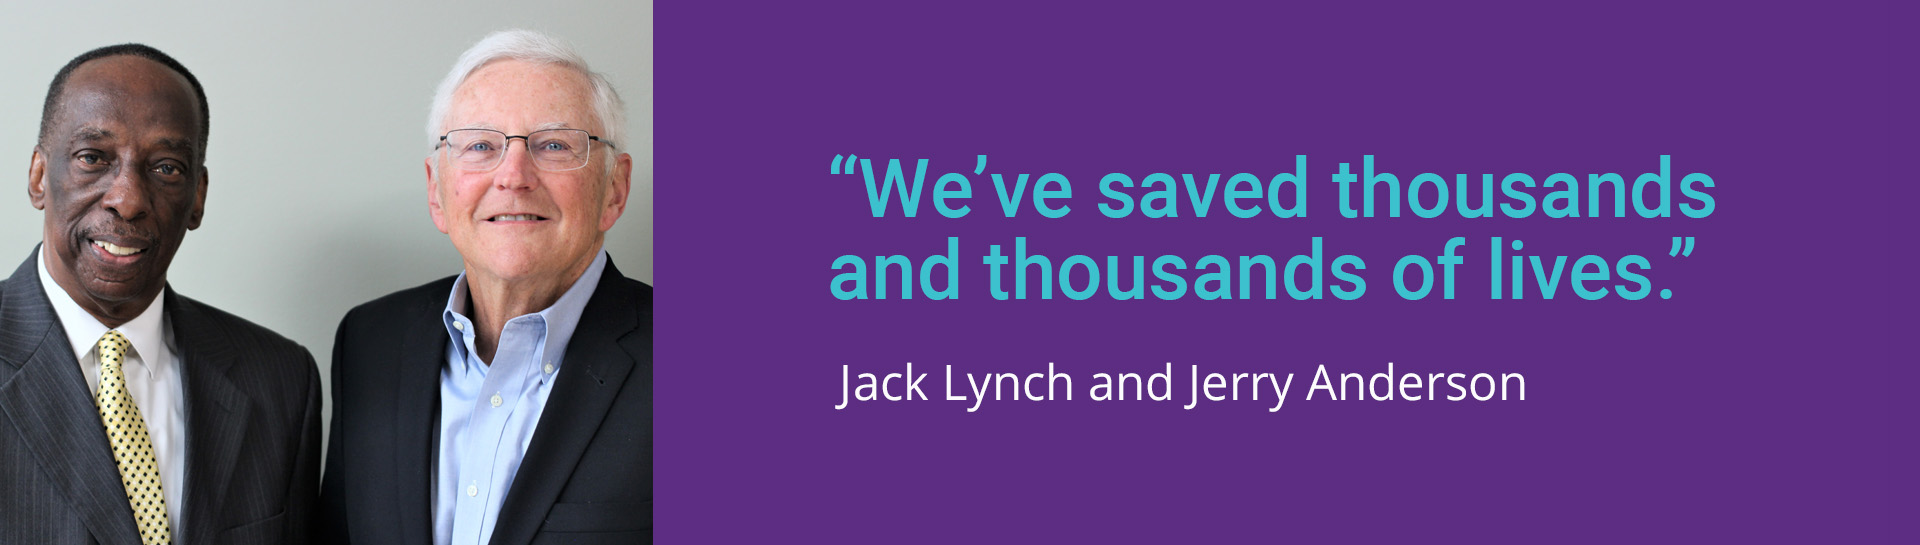 Jack Lynch and Jerry Anderson photo with text: “We’ve saved thousands and thousands of lives.”